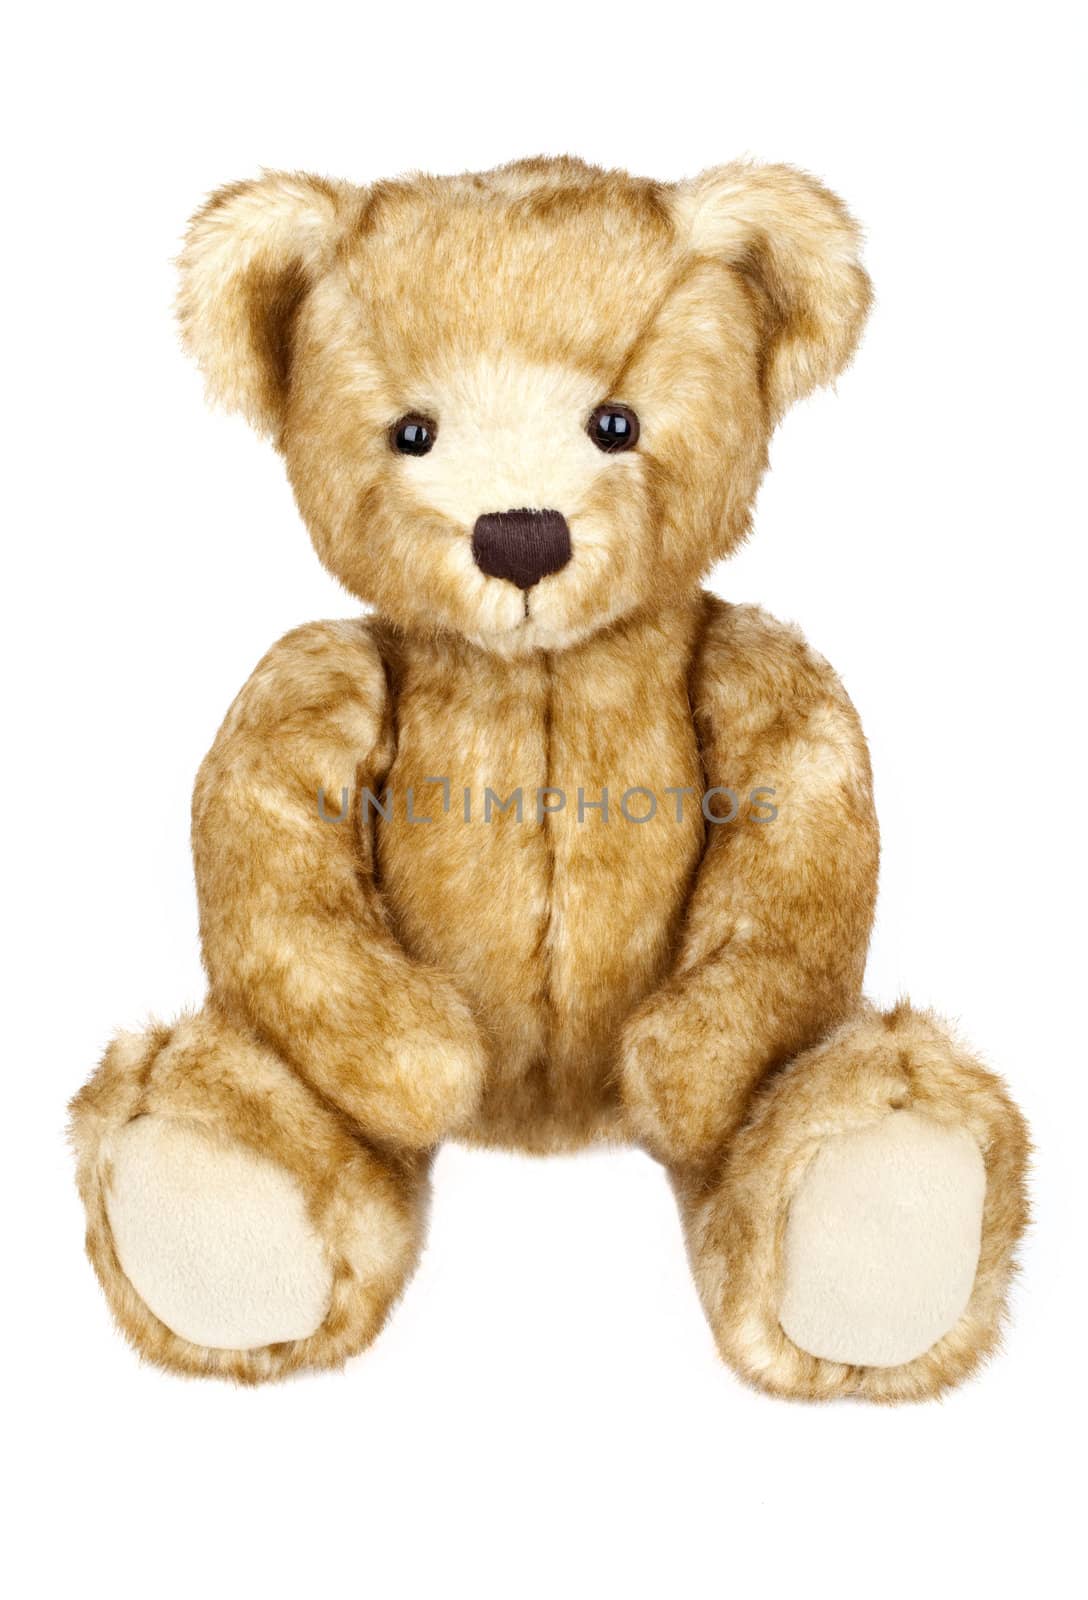 A traditional Teddy Bear on a white background.